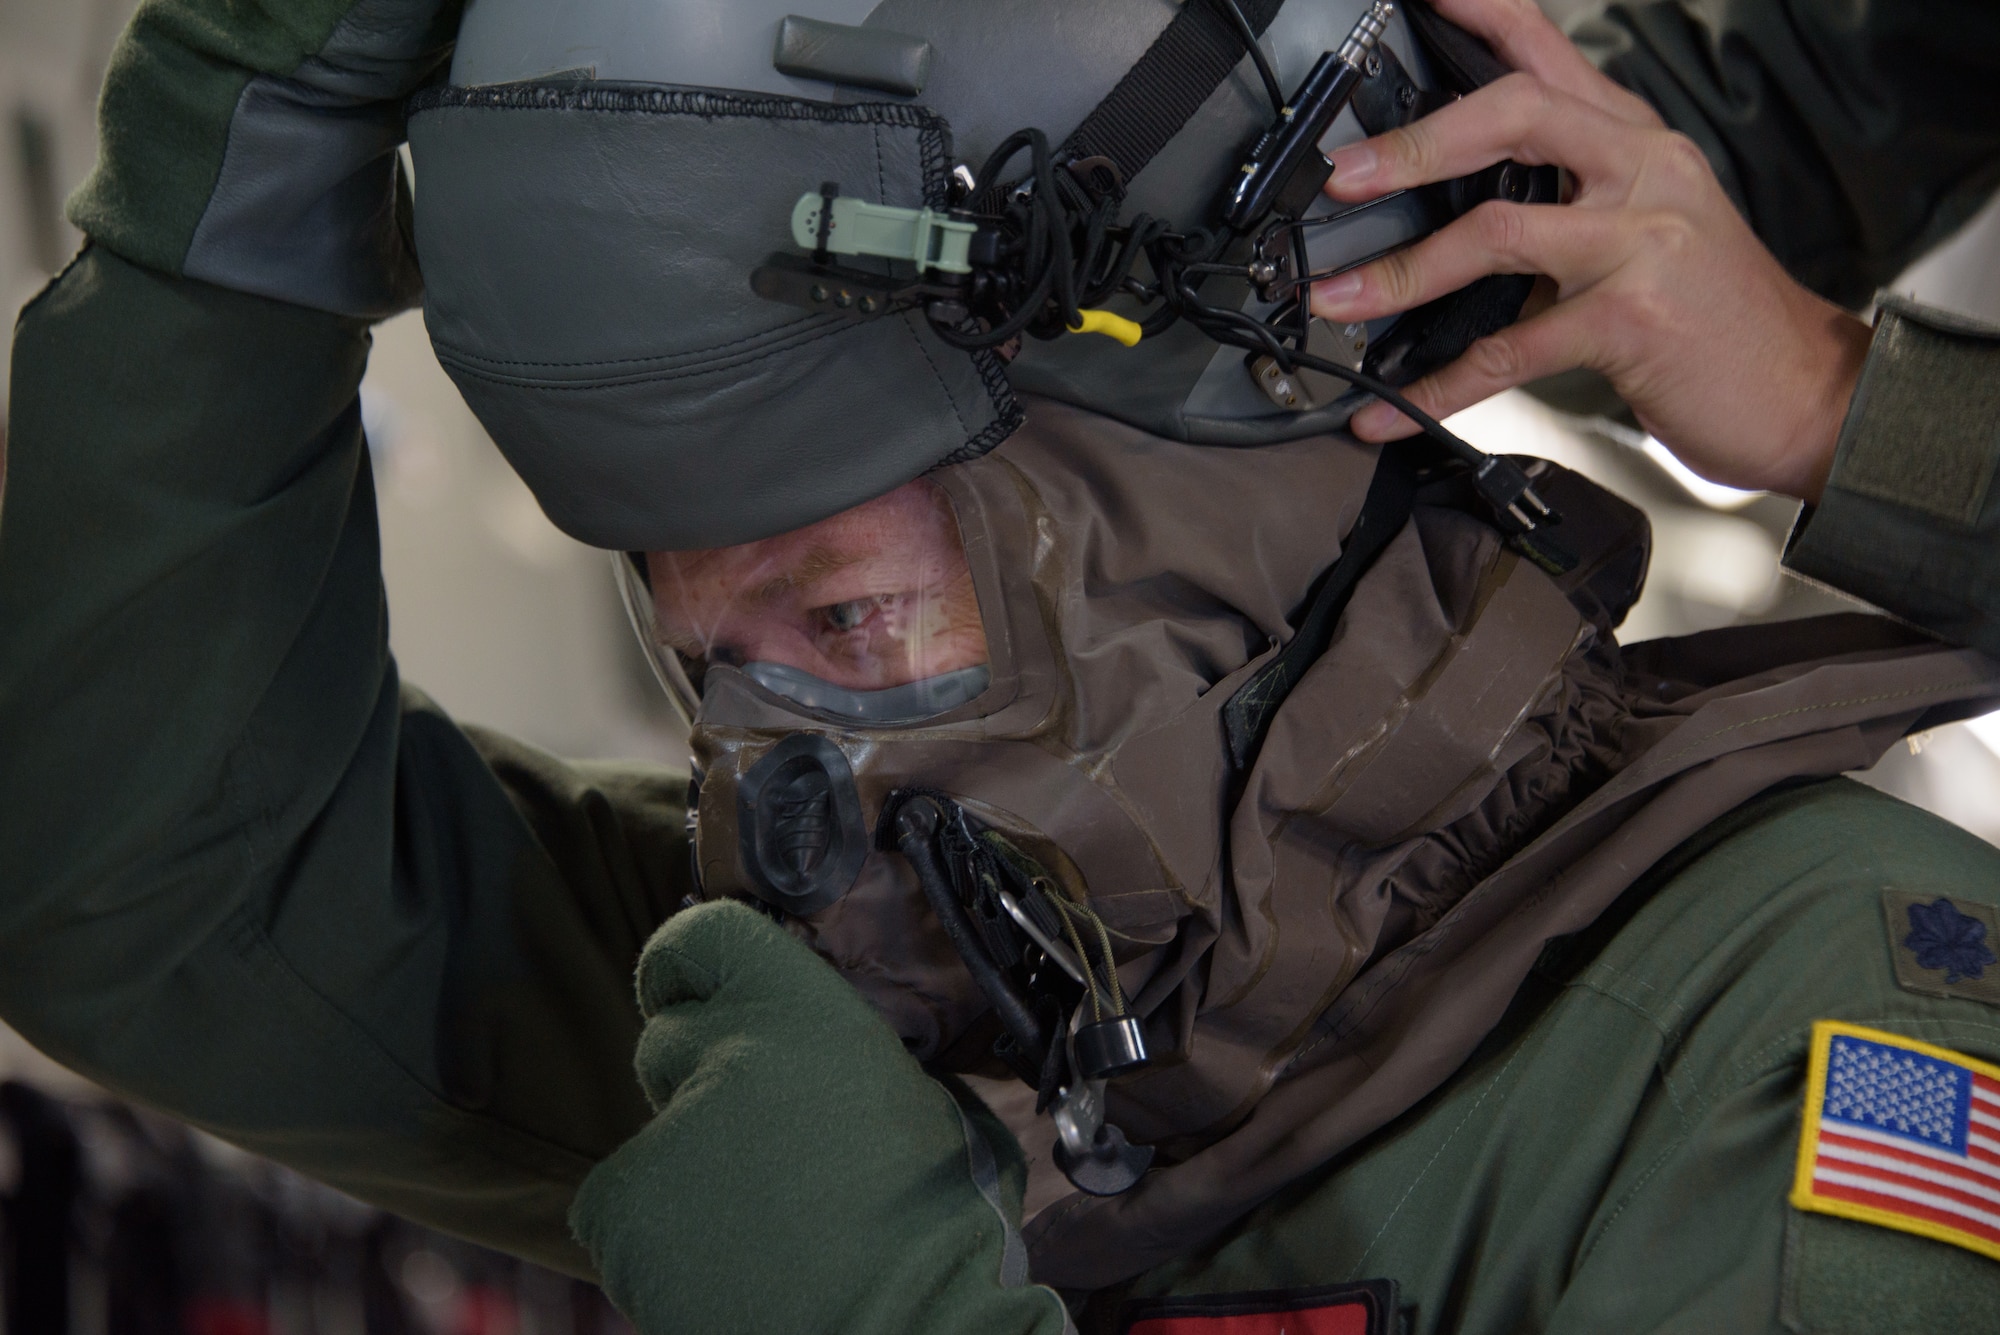 U.S. Air Force Lt. Col. Michael Pettibone, 21st Airlift Squadron C-17 Globemaster III pilot, dons Aircrew Eye and Respiratory Protection System (AERPS) equipment as part of a base exercise Nov. 16, 2020, at Travis Air Force Base, California. Airmen at Travis AFB participate in readiness exercises to ensure they can operate in contested environments.. (U.S. Air Force photo by Tech. Sgt. Traci Keller)